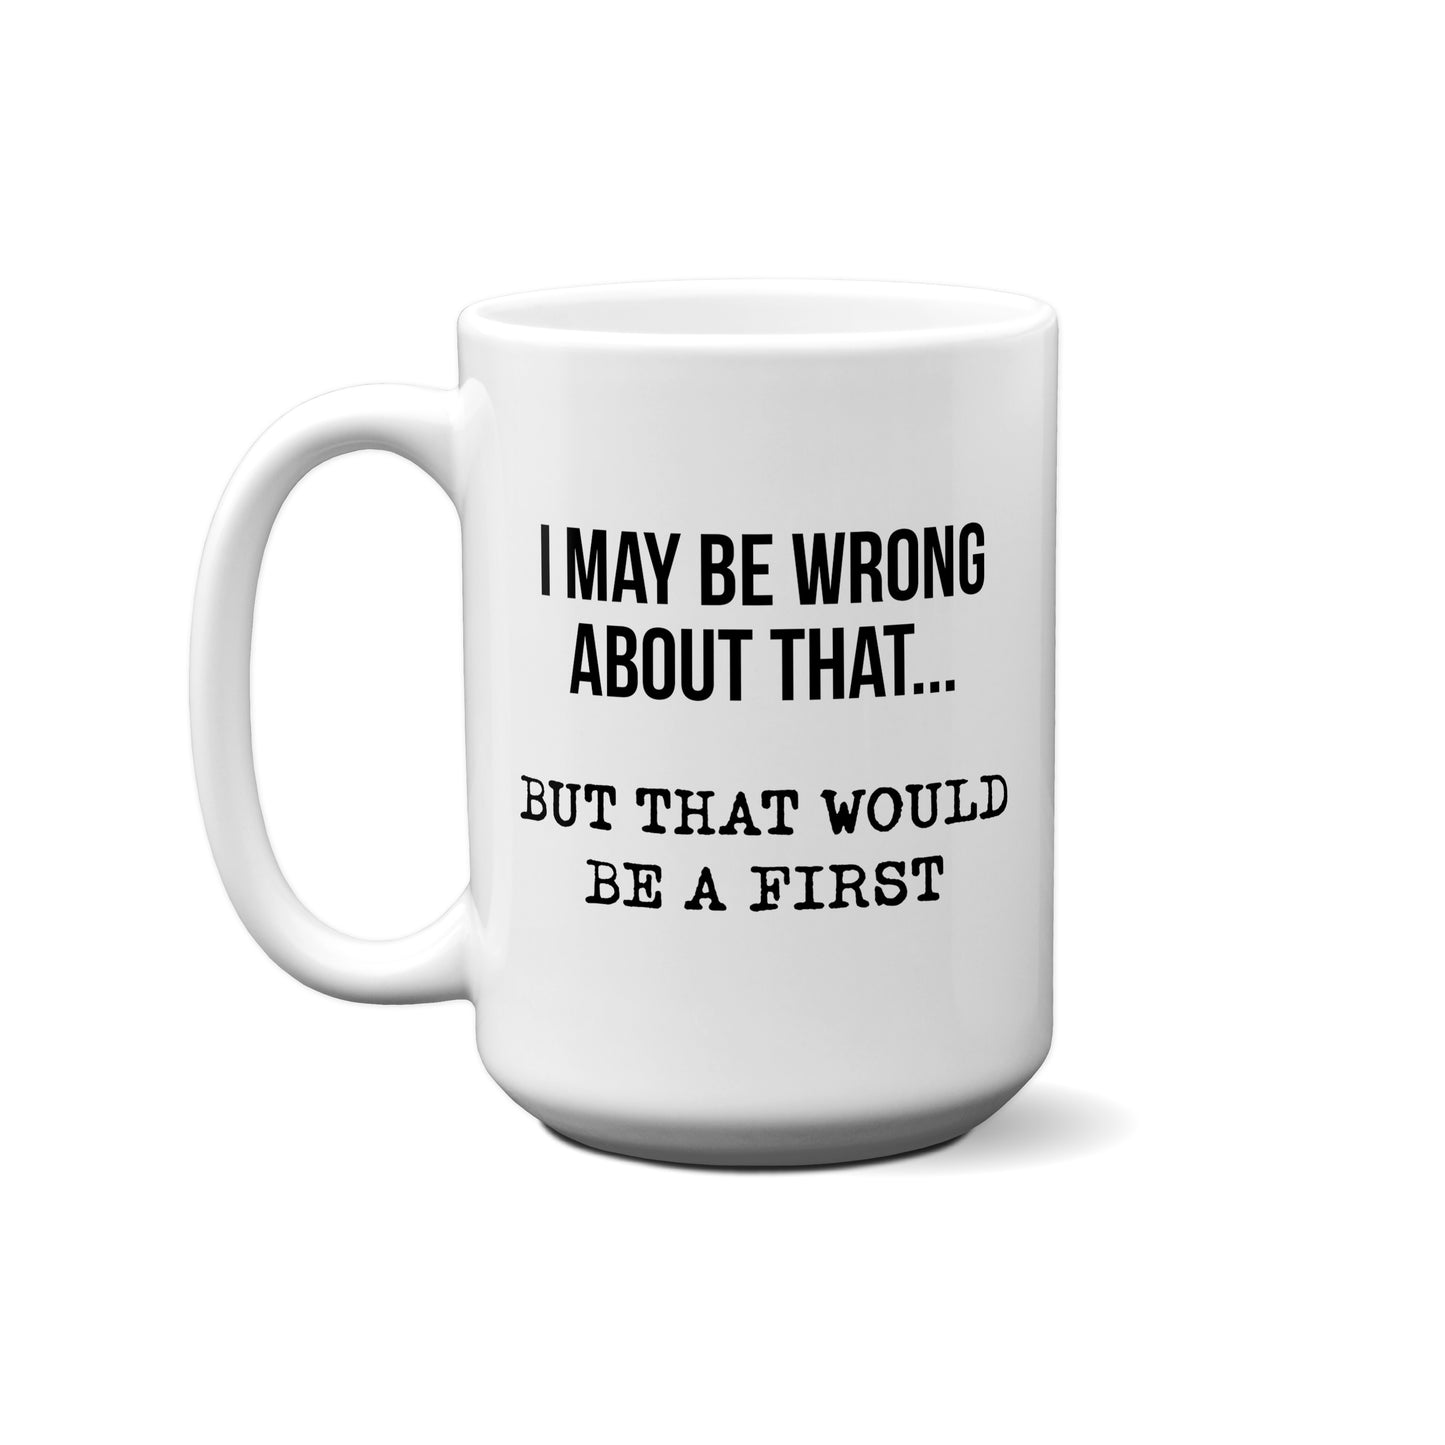 I May Be Wrong About That… But That Would Be A First. Quote Mug